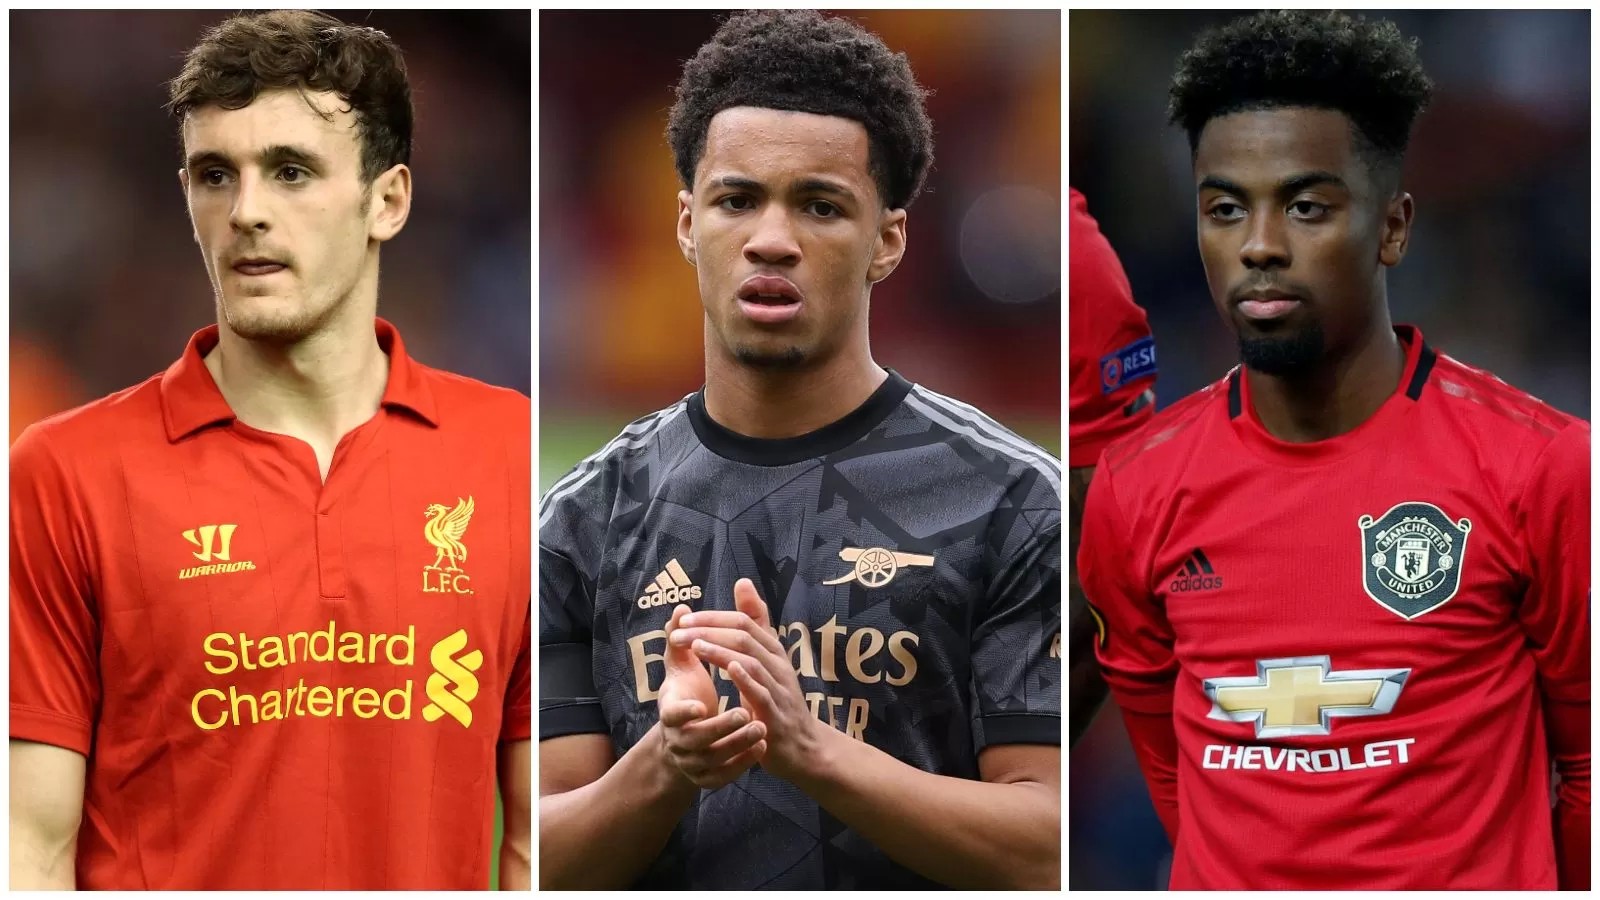 Every club’s youngest Premier League debutant and what happened to them